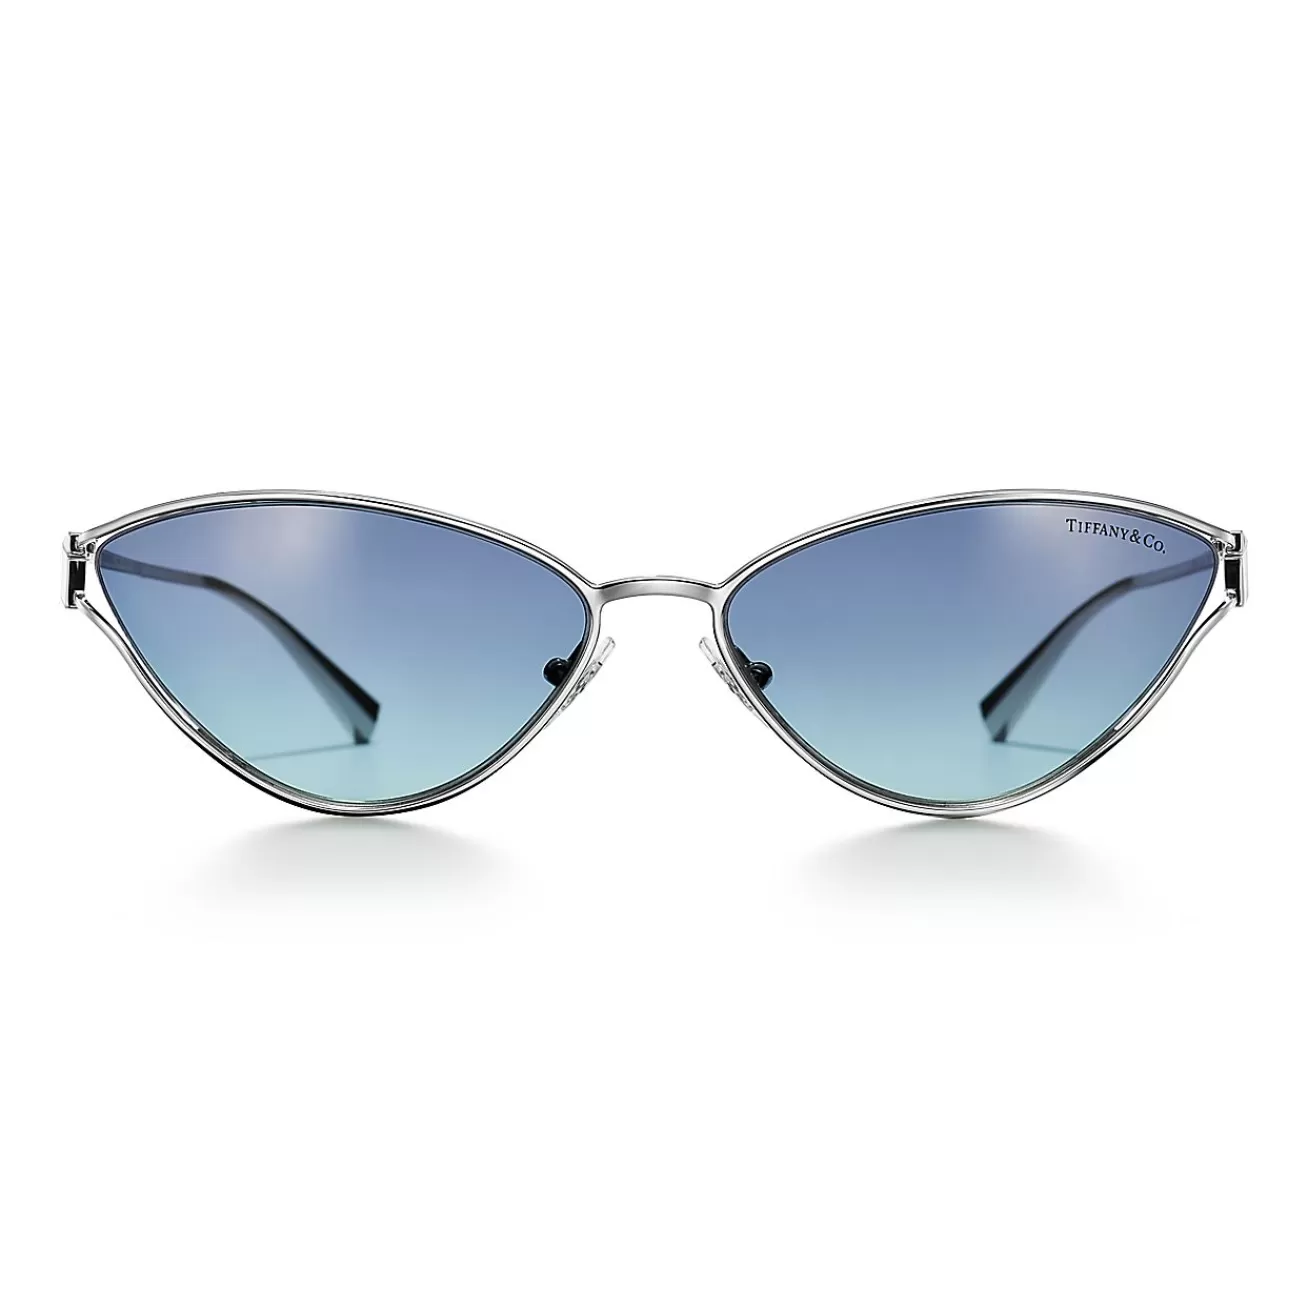 Tiffany & Co. Tiffany T Sunglasses in Silver-colored Metal with Tiffany Blue® Gradient Lenses | ^Women Tiffany T | Gifts $1,500 & Under